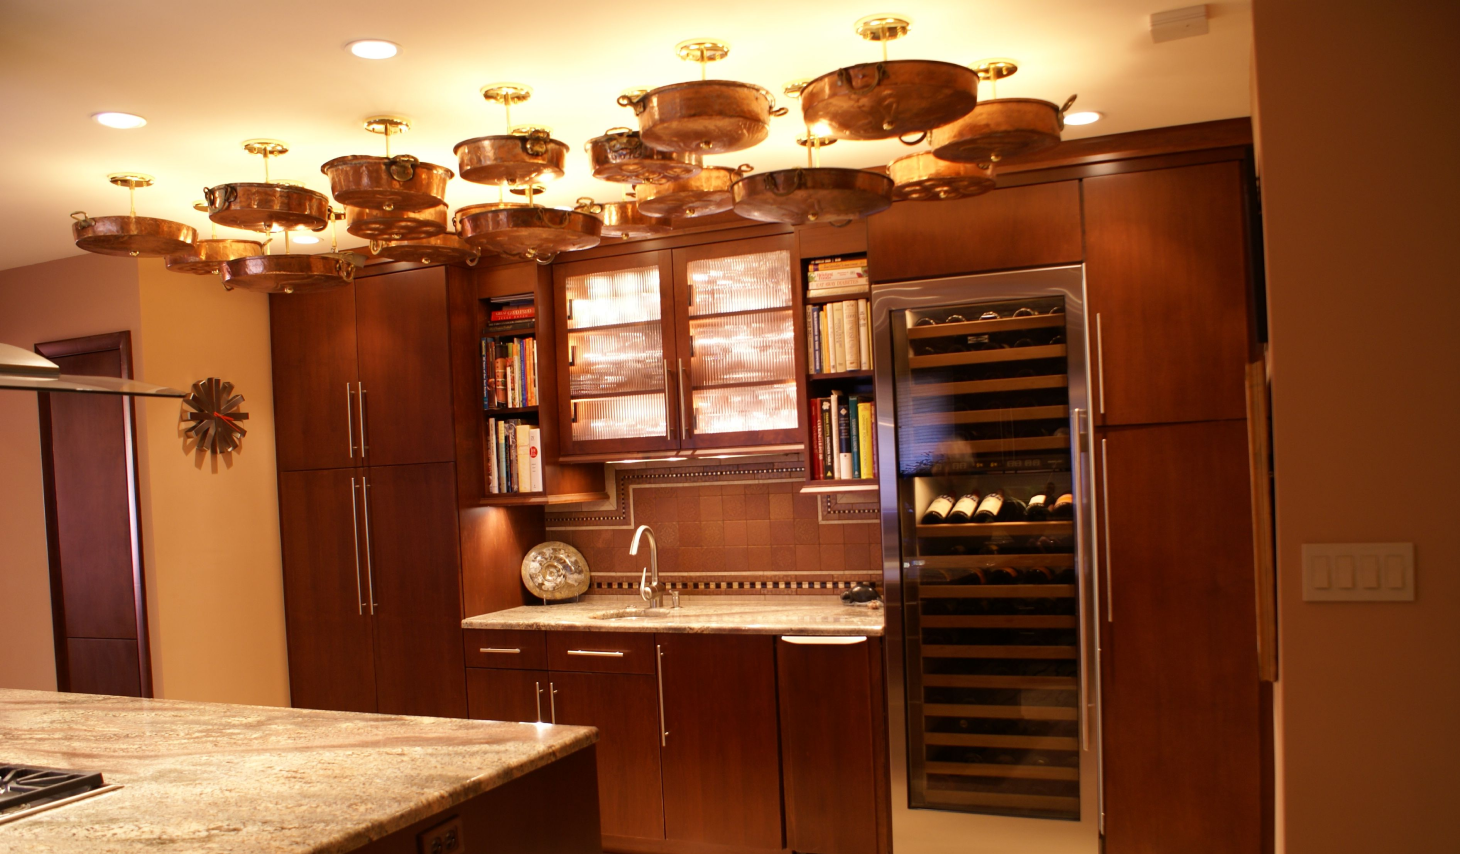 A kitchen with wooden cabinets and wine cooler.